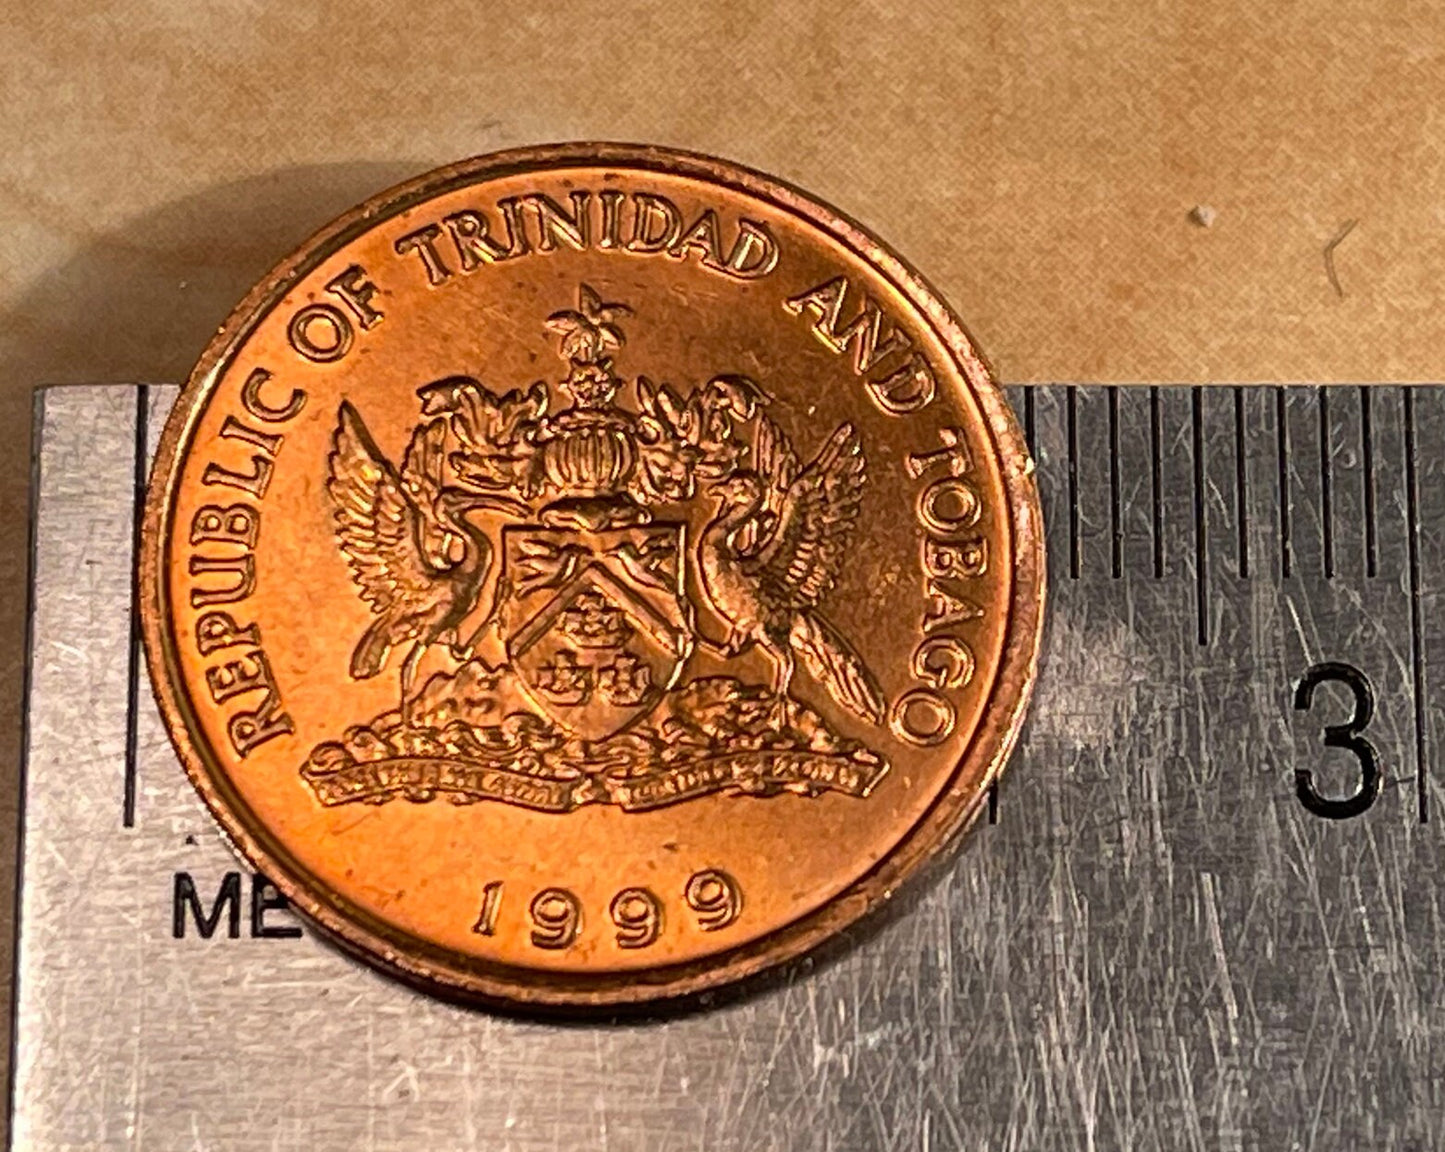 Bird of Paradise 5 Cents Trinidad & Tobago Authentic Coin Money for Jewelry and Craft Making